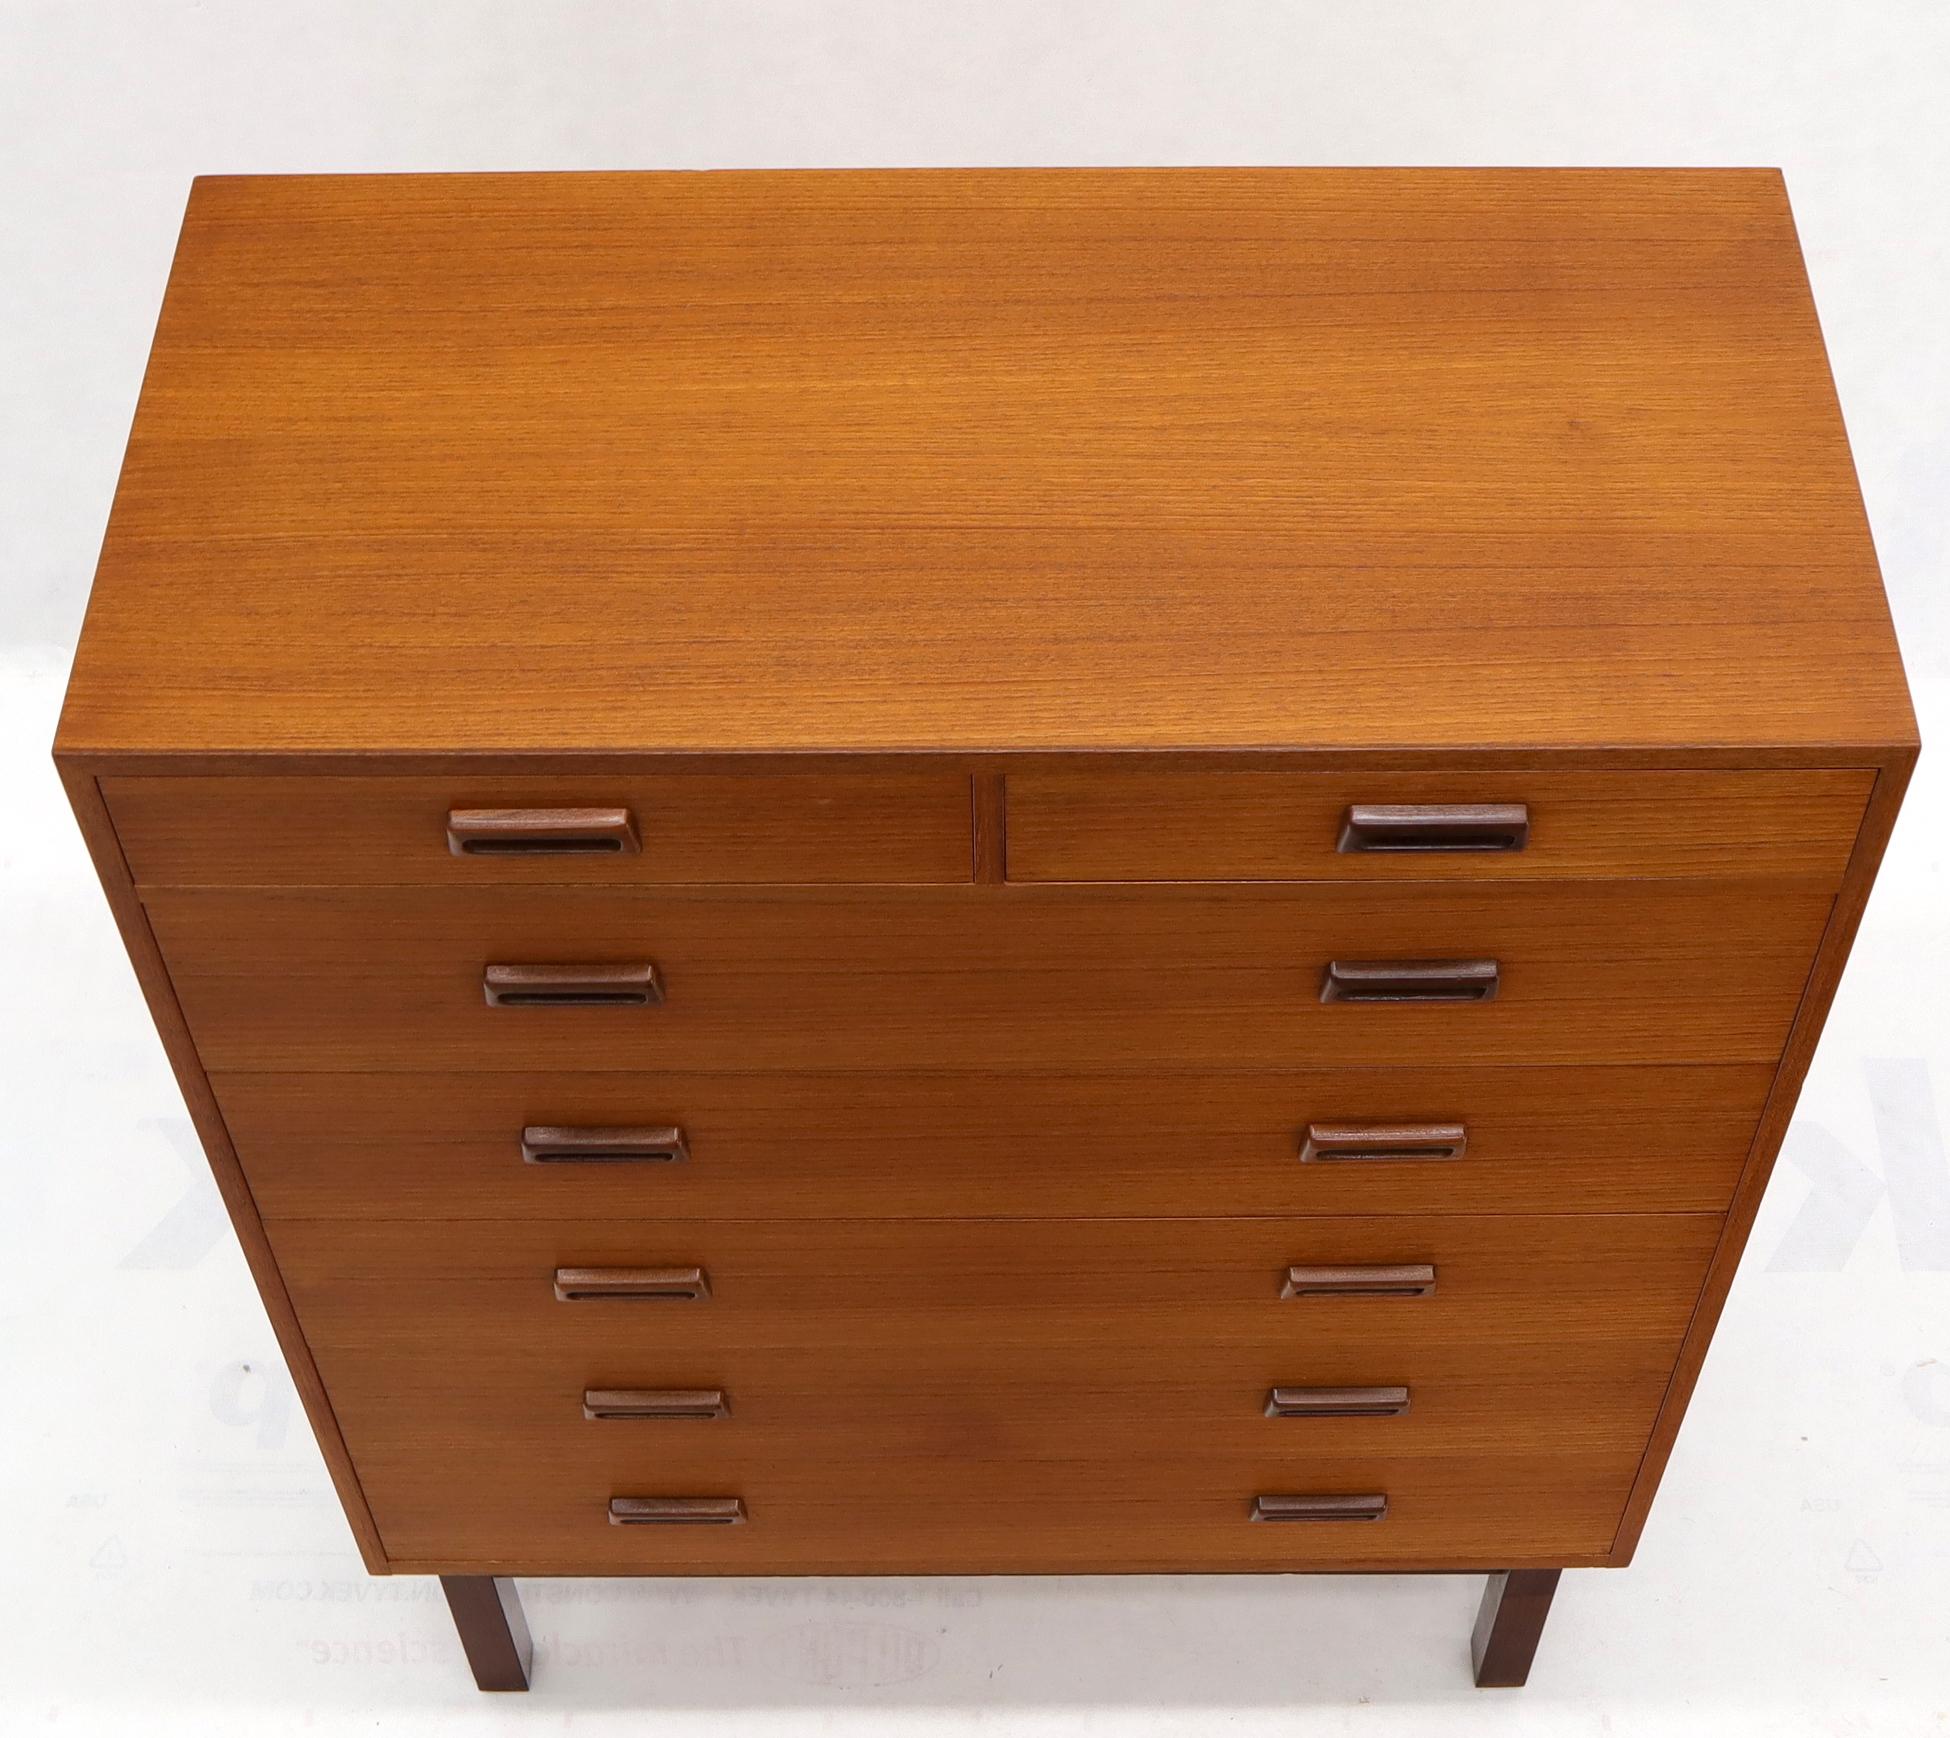 Lacquered Danish Mid-Century Modern Tall High Boy Chest of 7 Drawers Dresser Cabinet For Sale